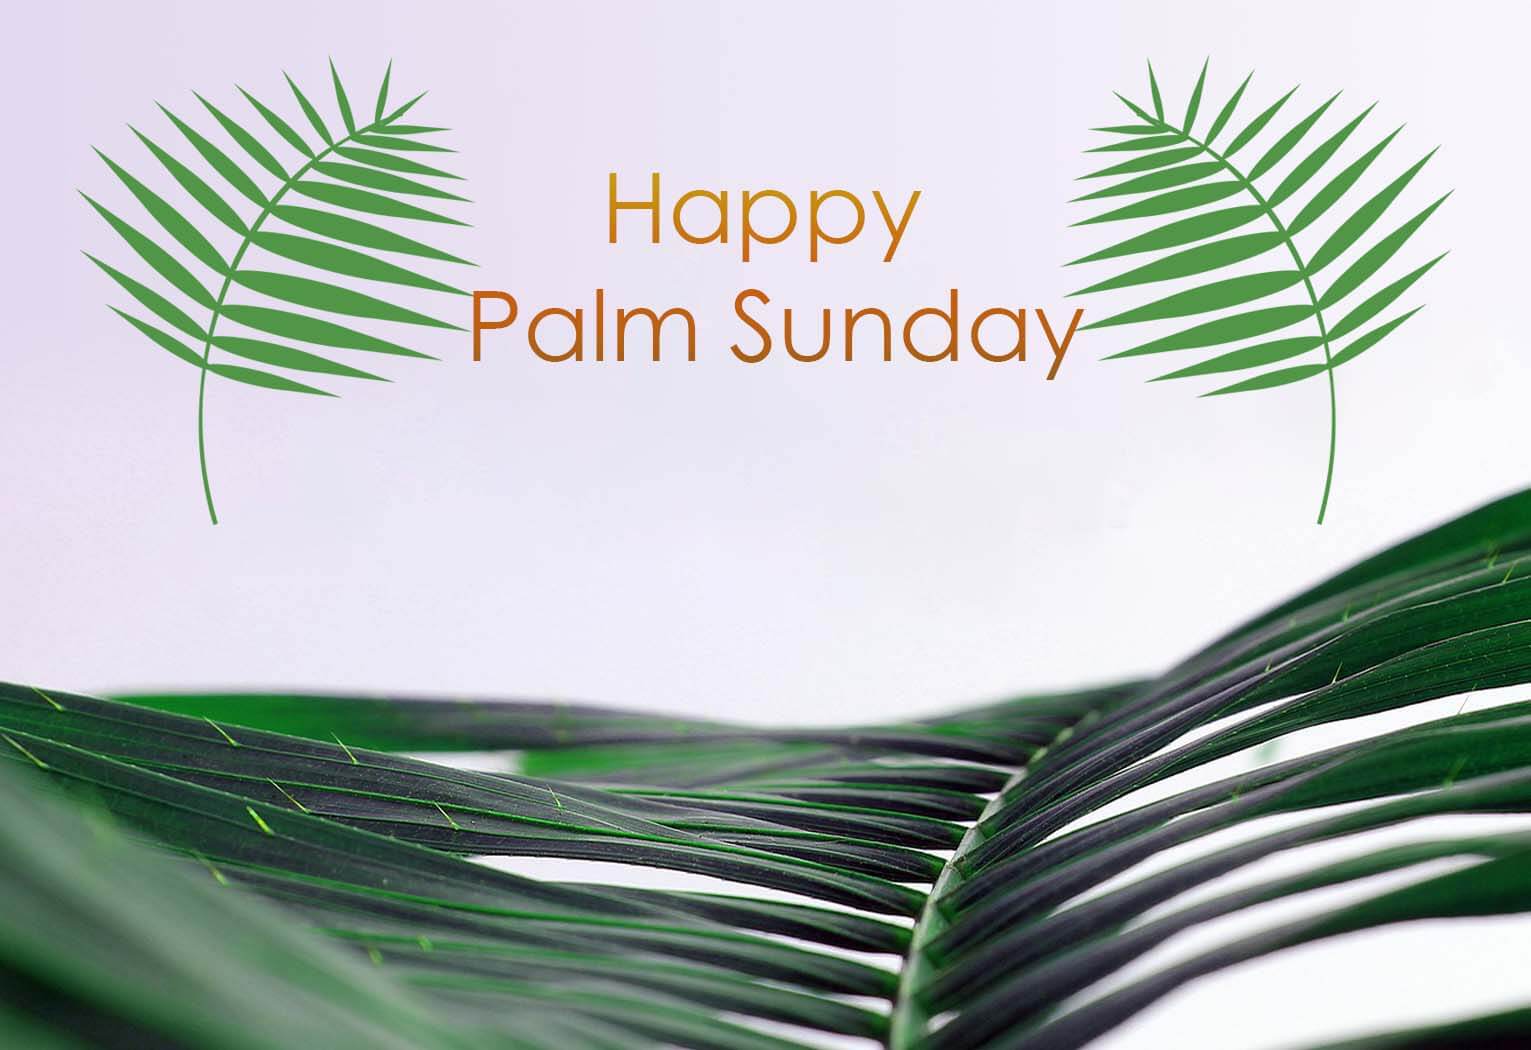 Happy Palm Sunday Messages and Greetings